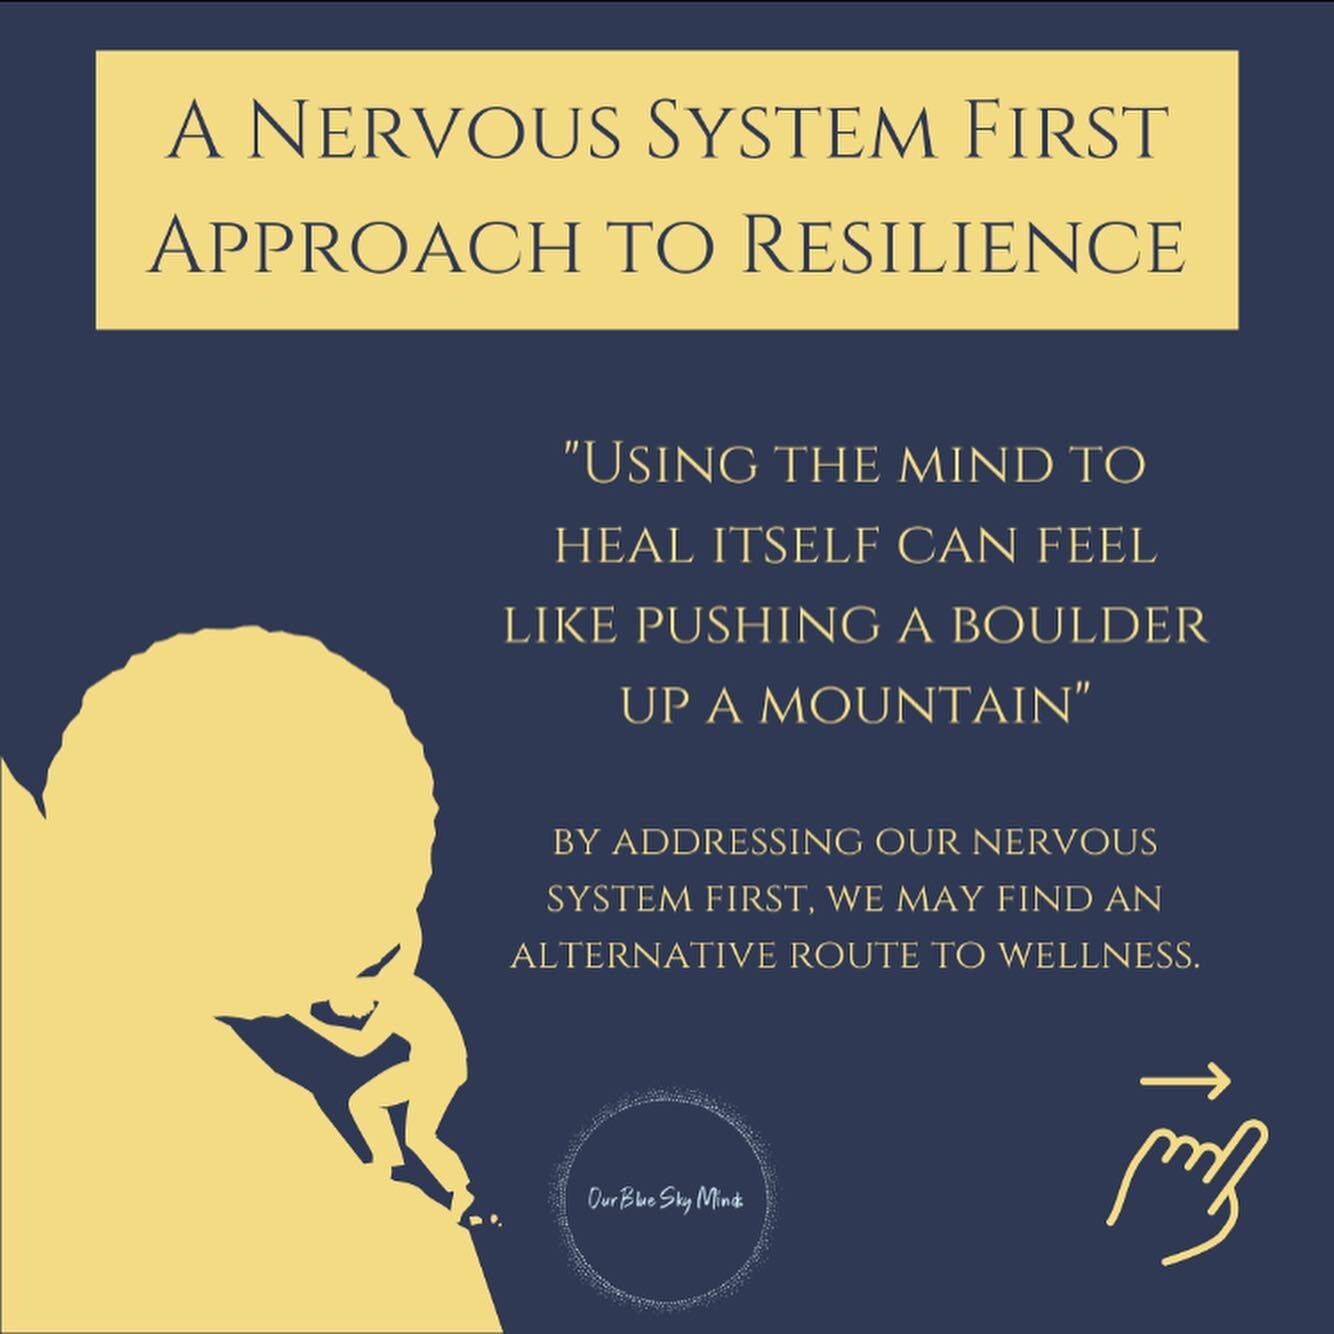 A nervous system first approach is about understanding and addressing the subconscious inputs and outputs that drive our emotions, behaviour, and thoughts. 

This approach offers a back door into influencing our mind, from the bottom up. 

By working